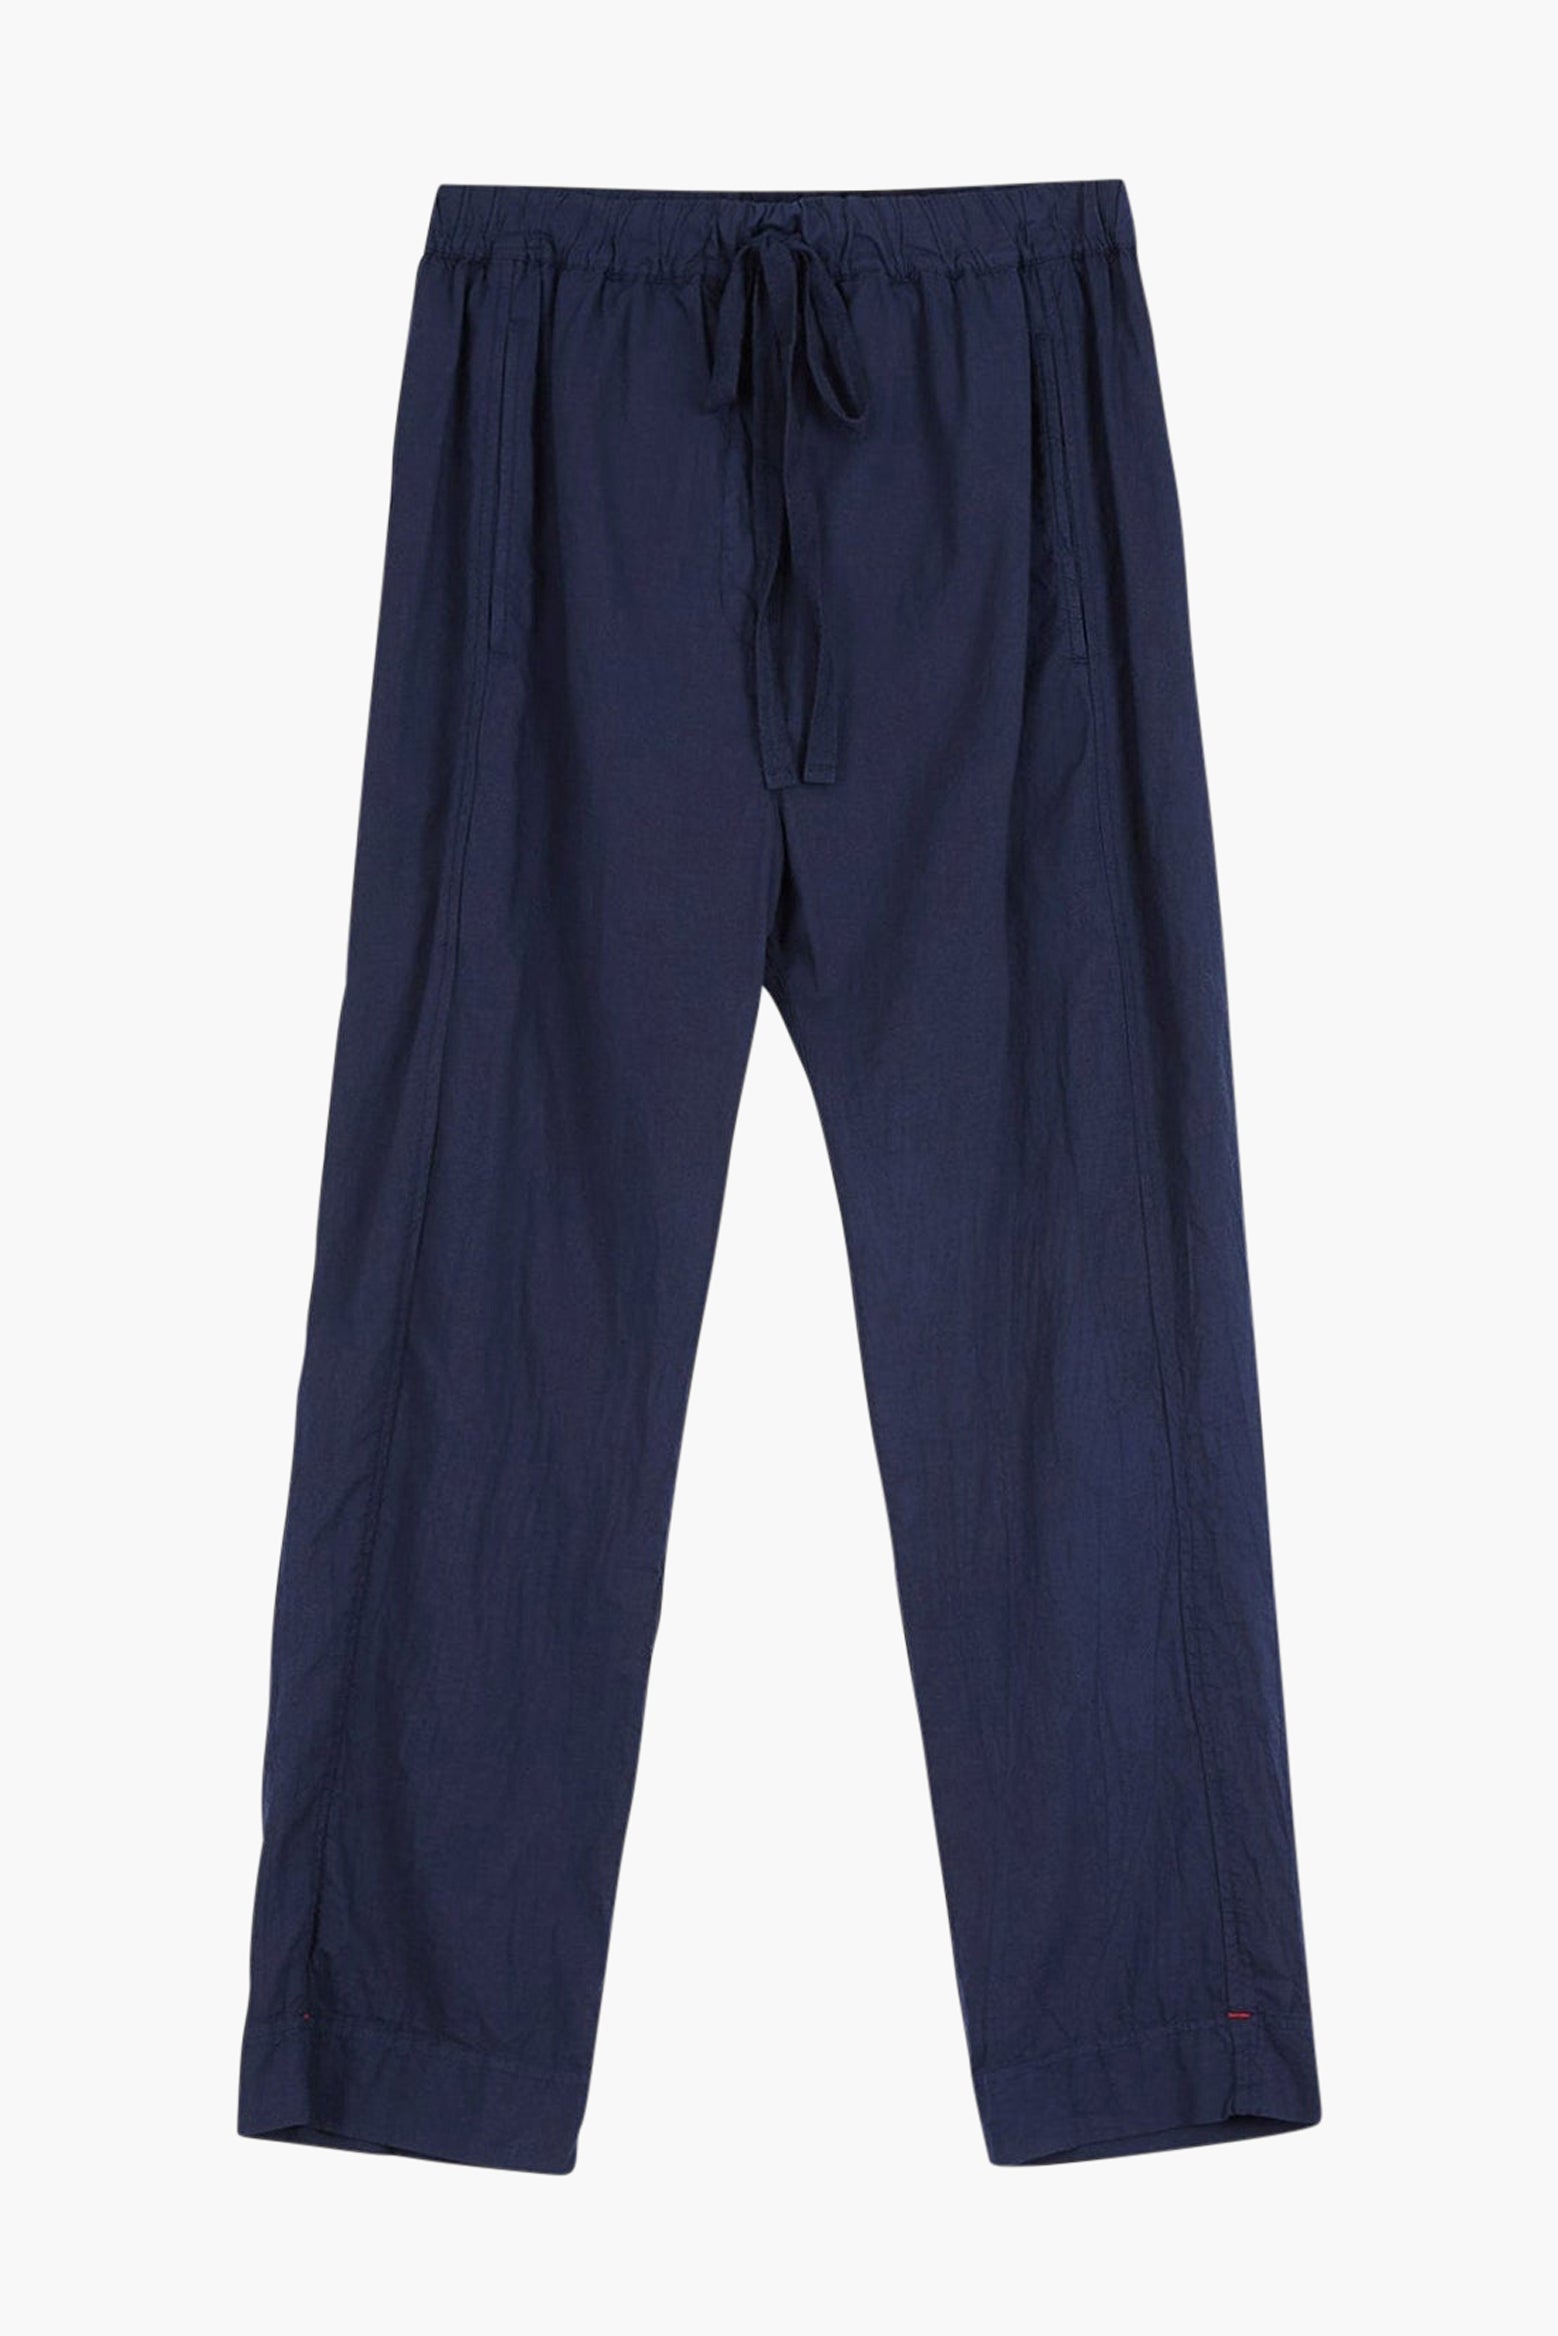 The Xirena Draper Pant in Navy available at The New Trend Australia